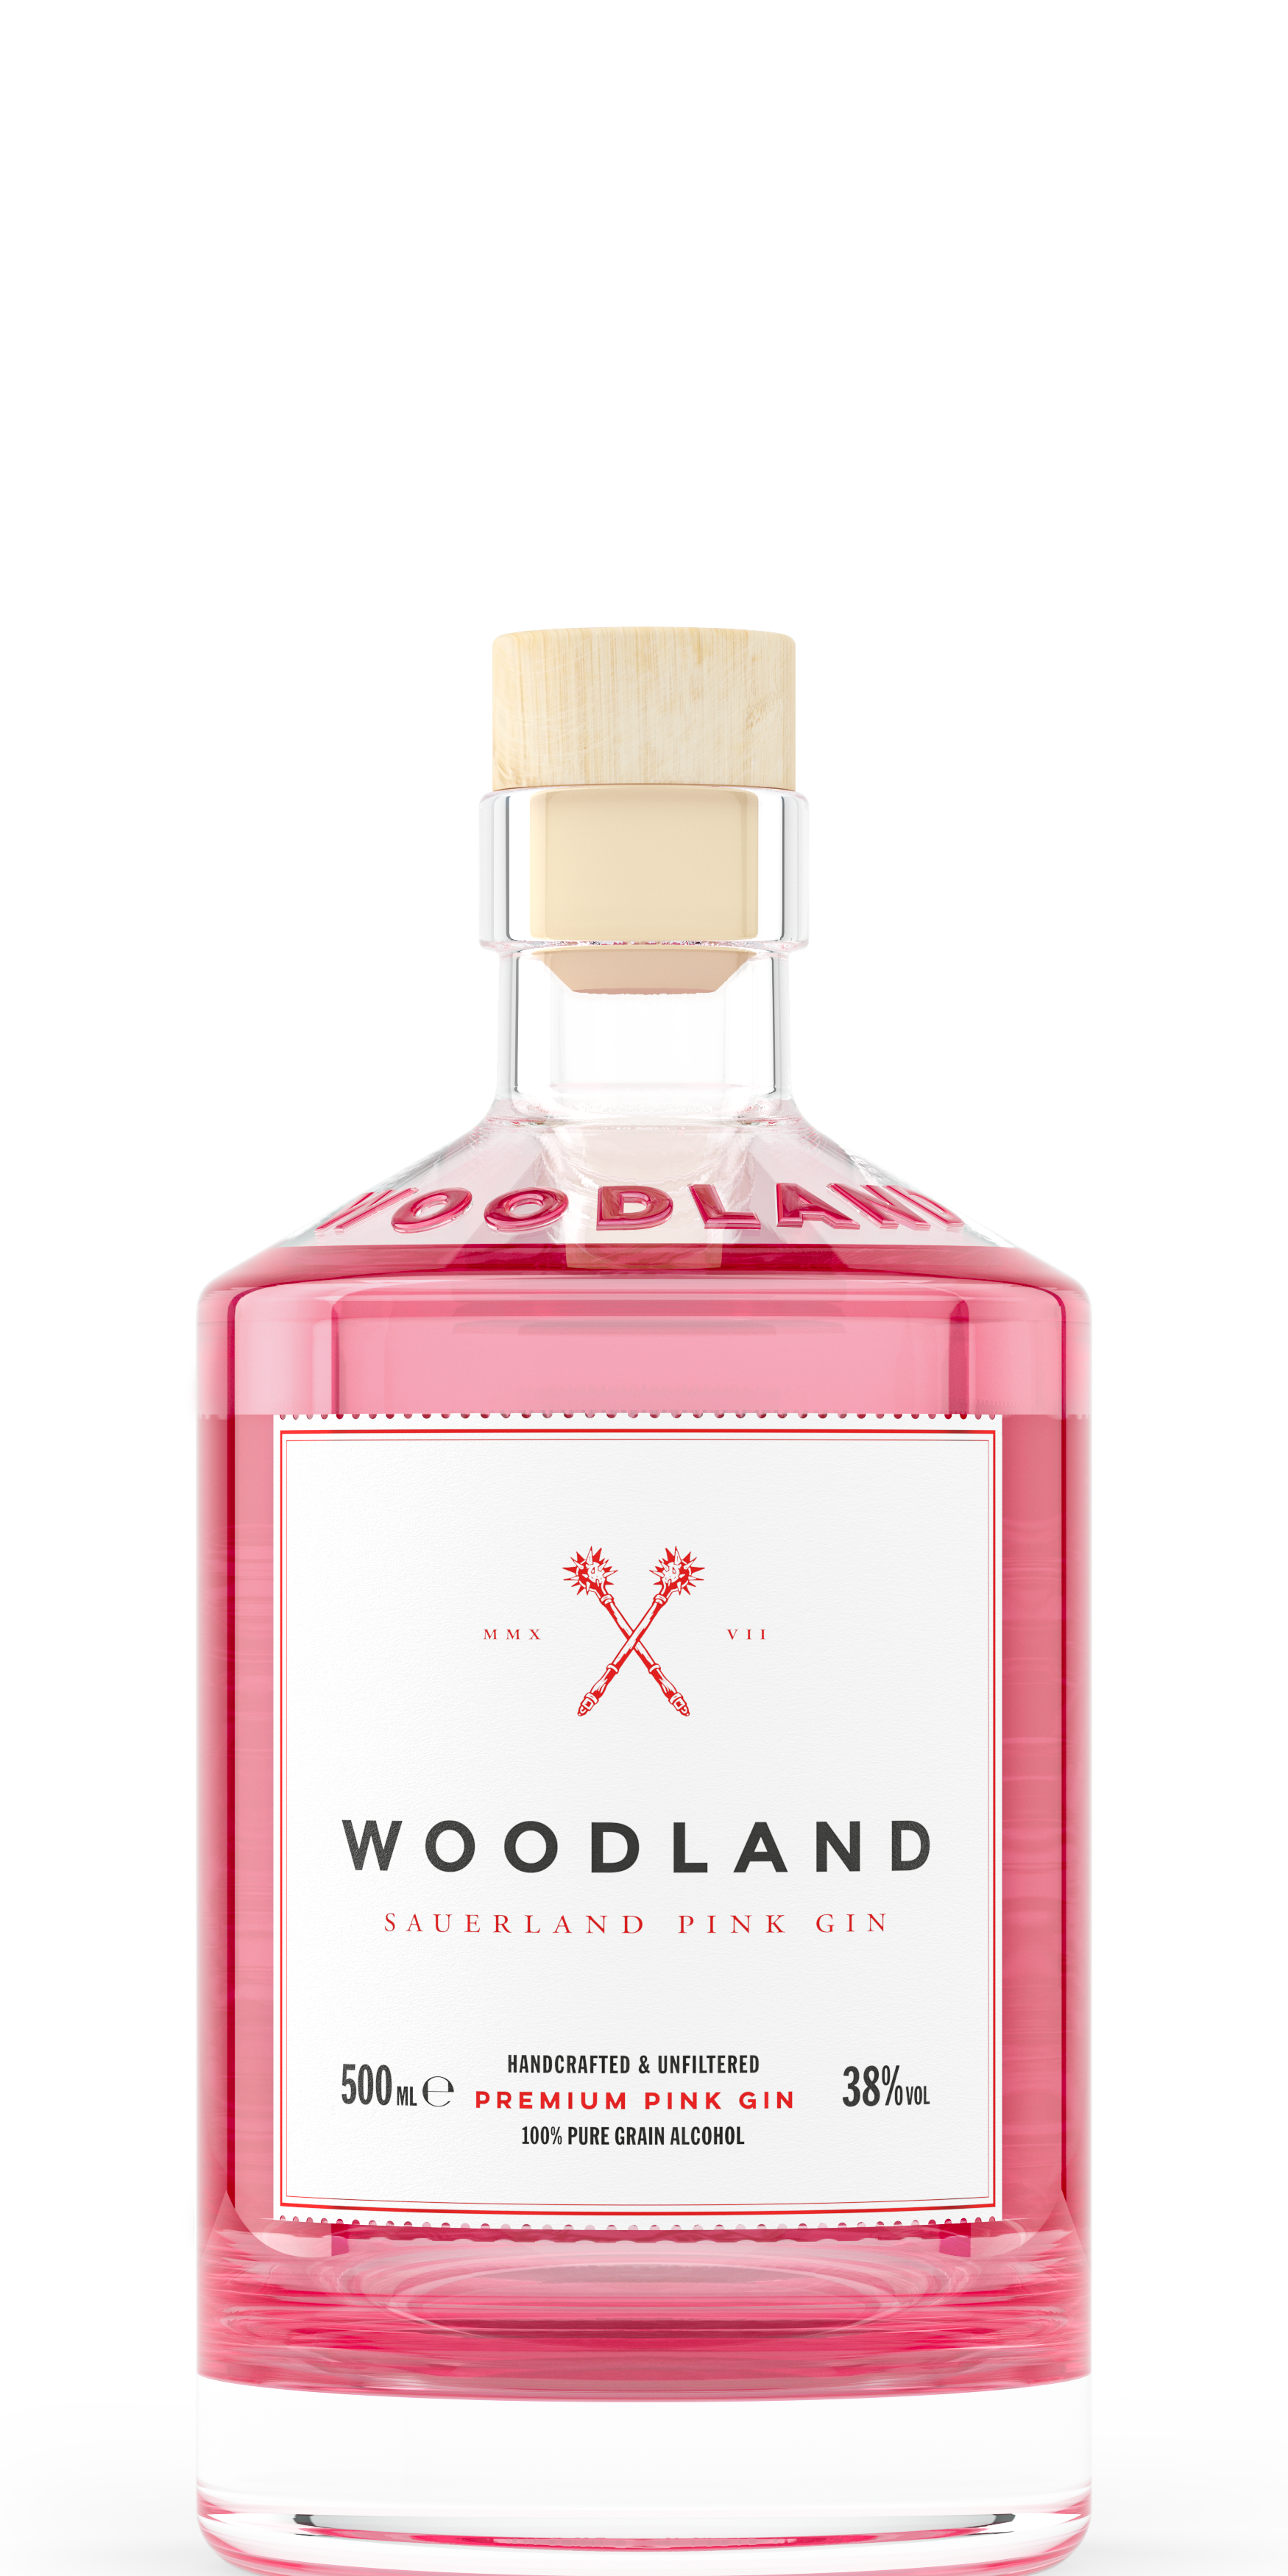 Woodland-pink-gin-500ml.png